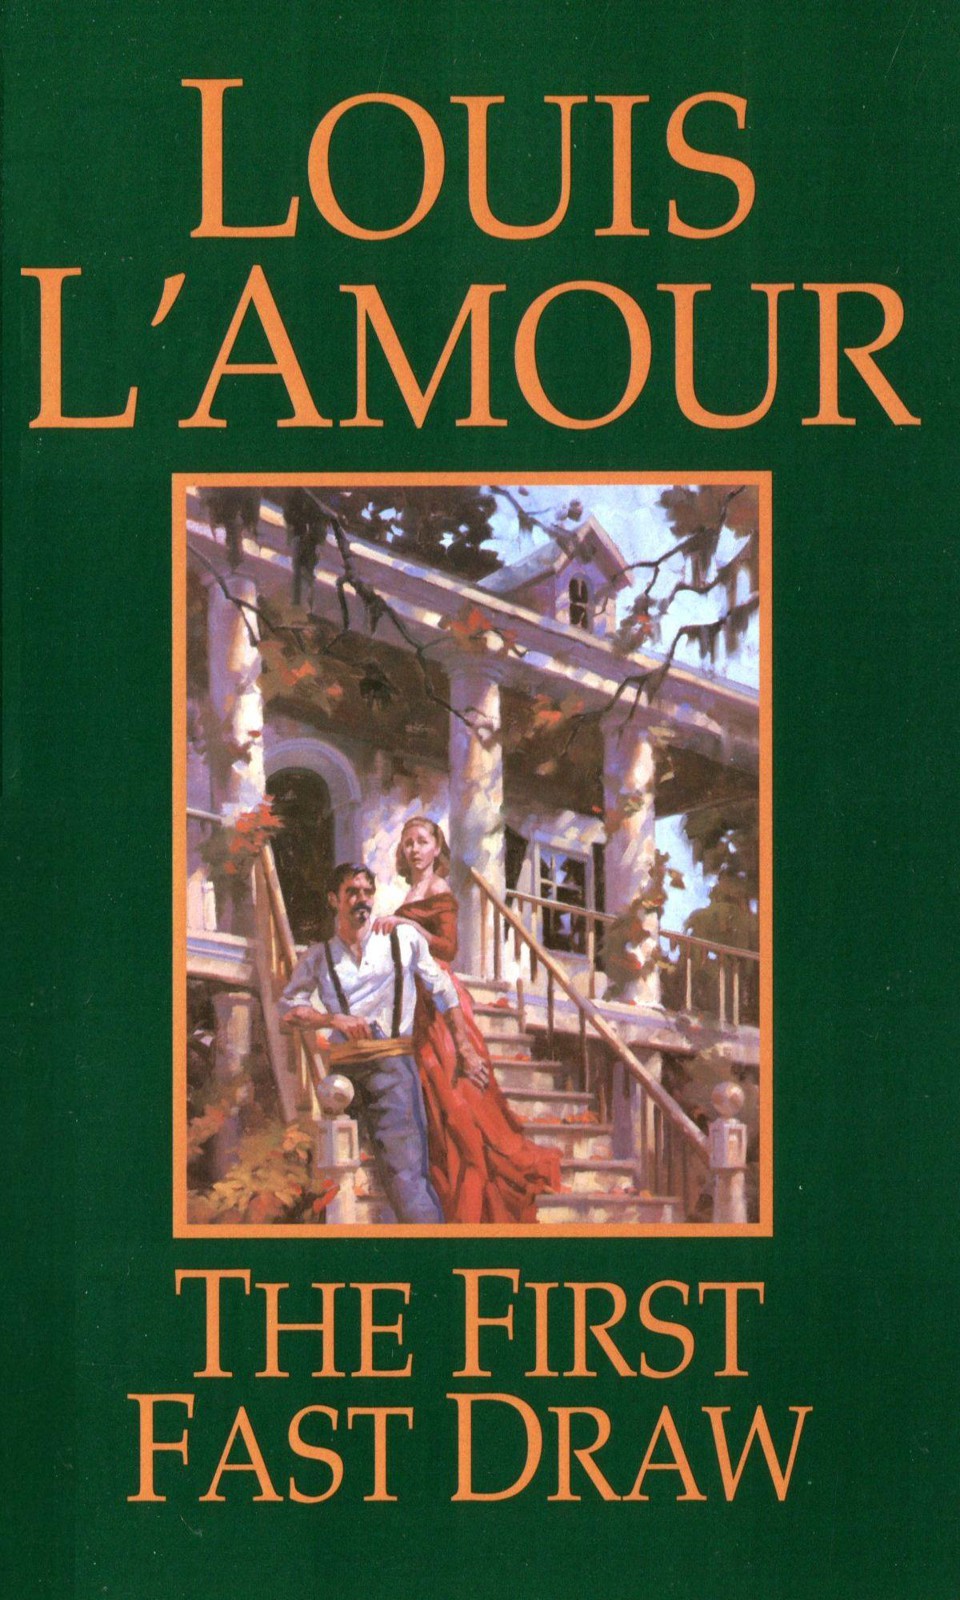 Novel 1959 - The First Fast Draw (v5.0) by Louis L'Amour